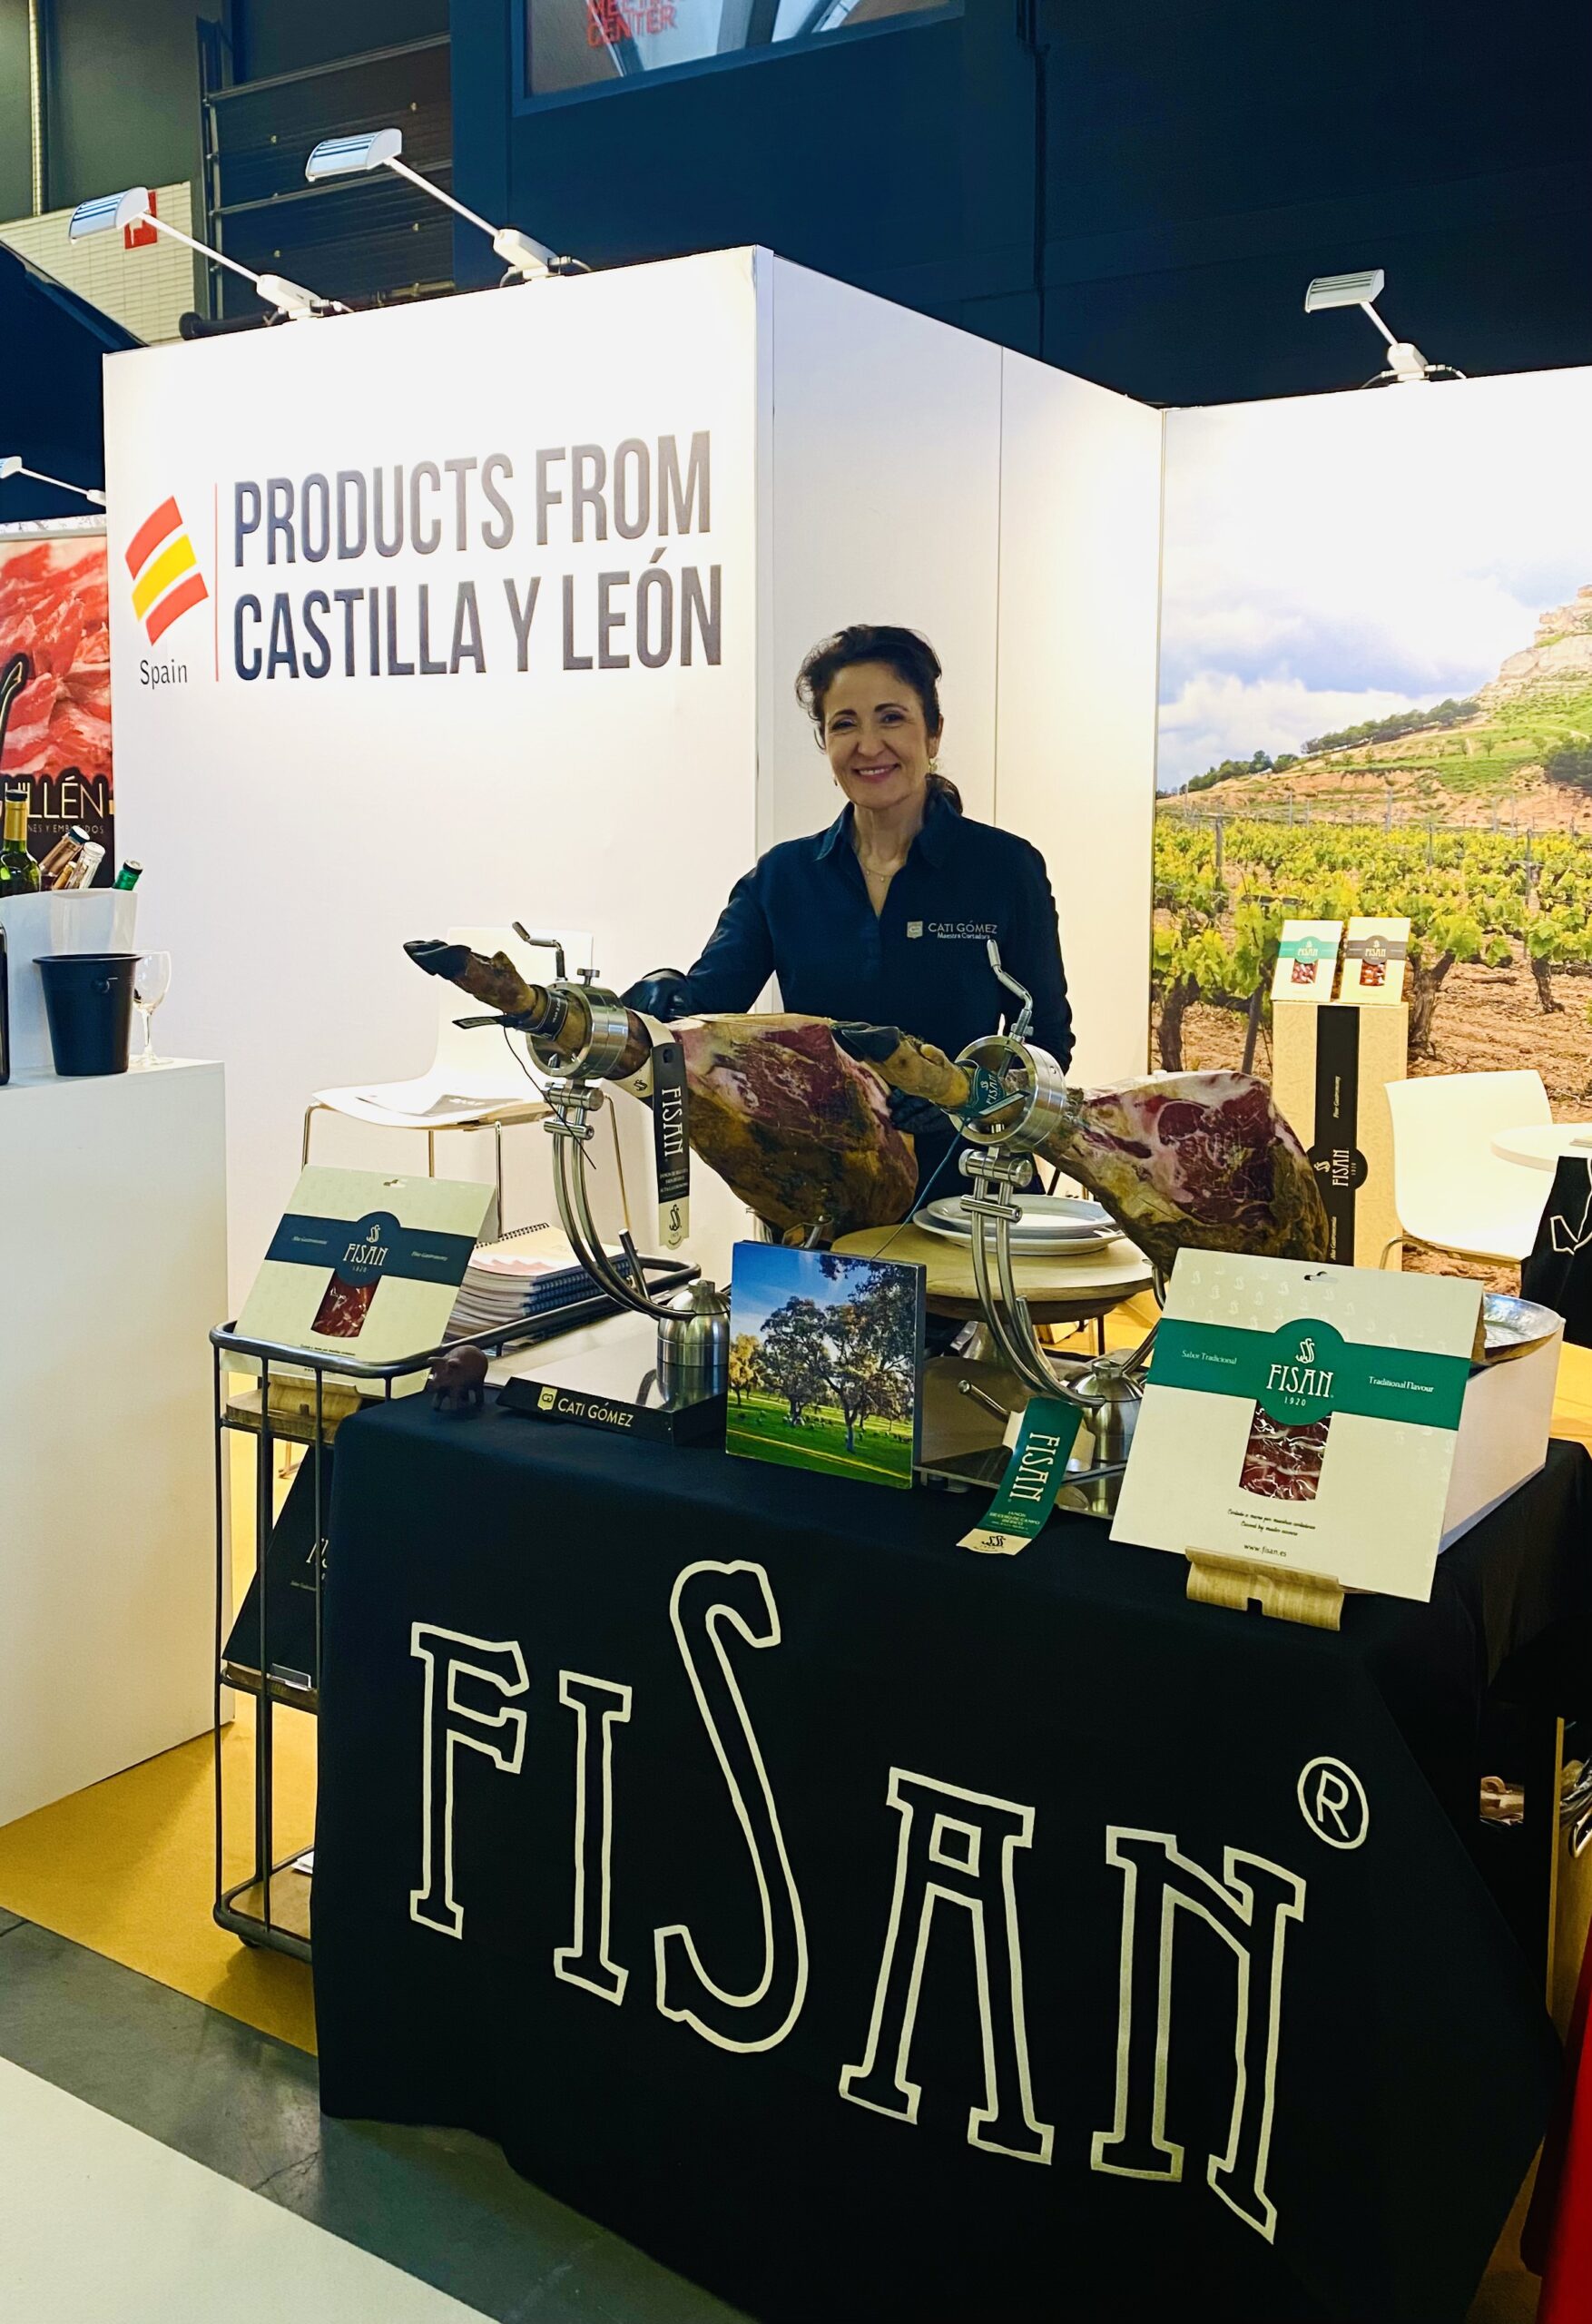 Cortadora de jamón is present during Tavola expo where she cuts iberico from the Fisan brand